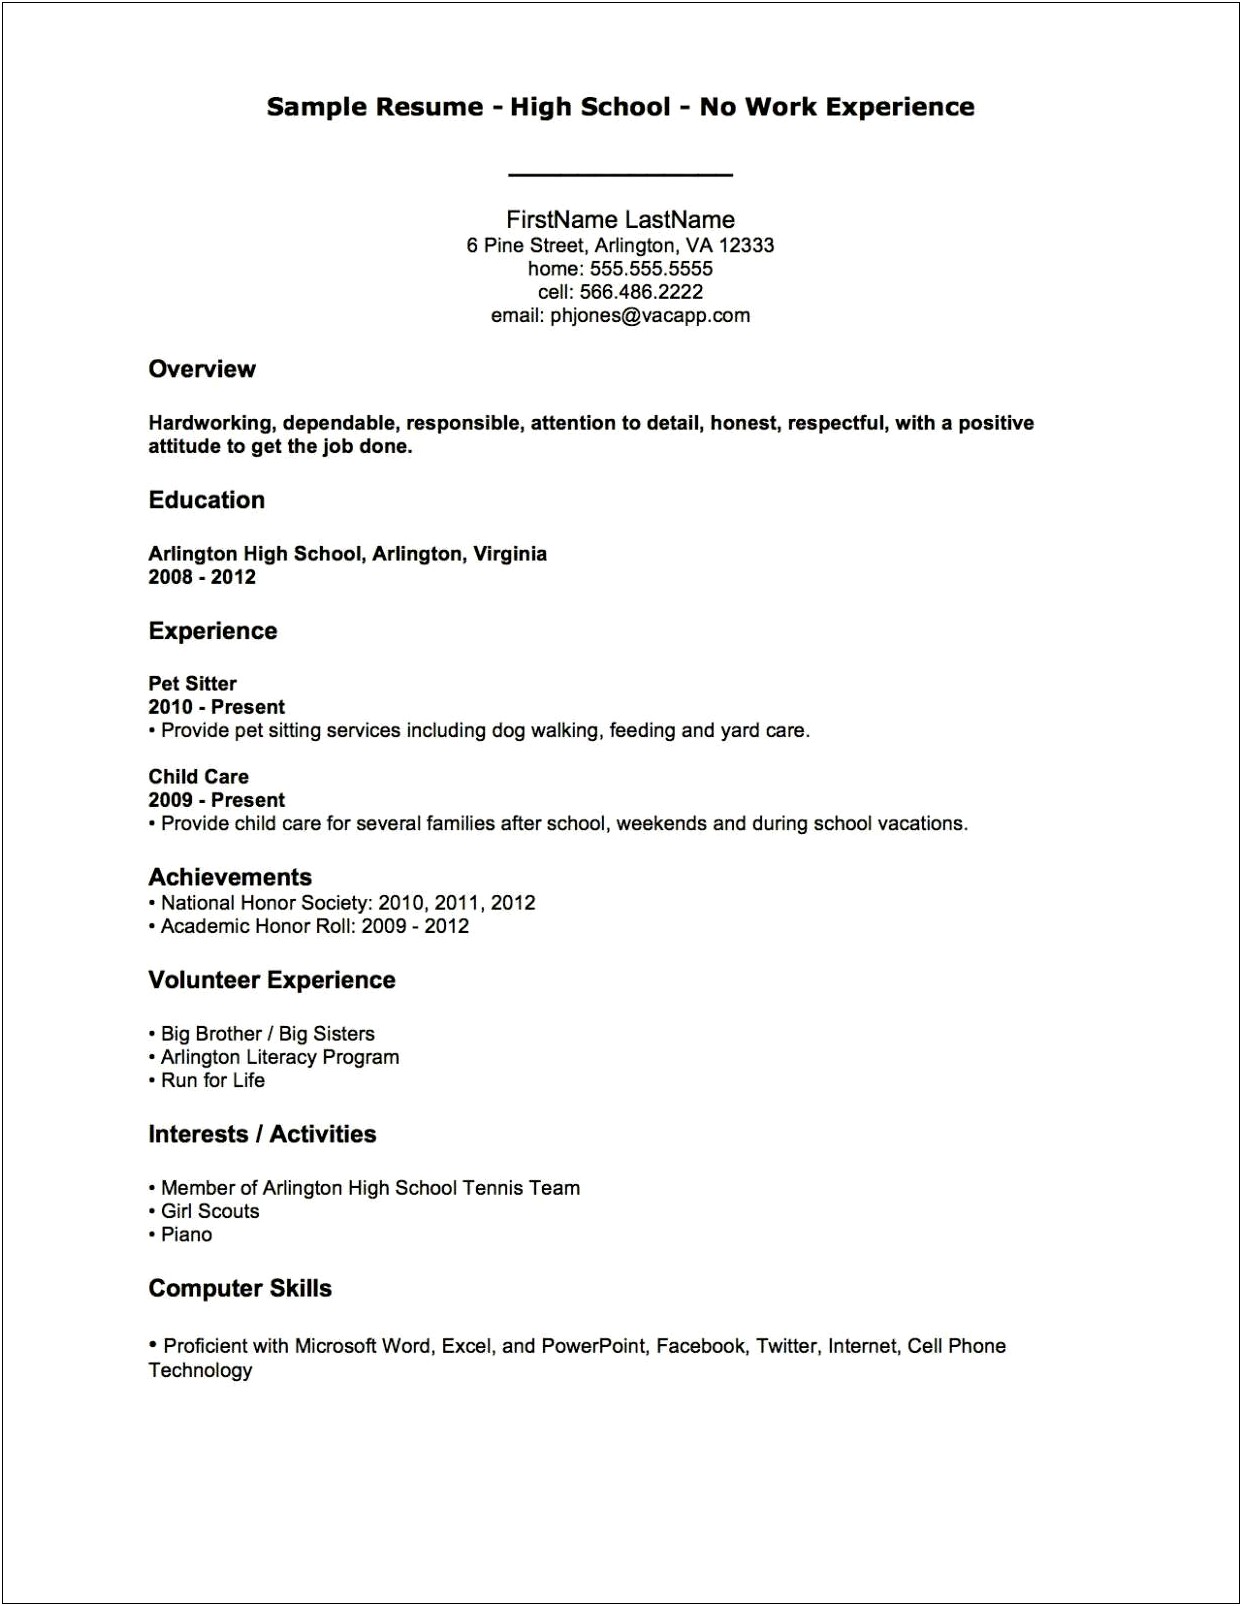 Resume For No Experience High School